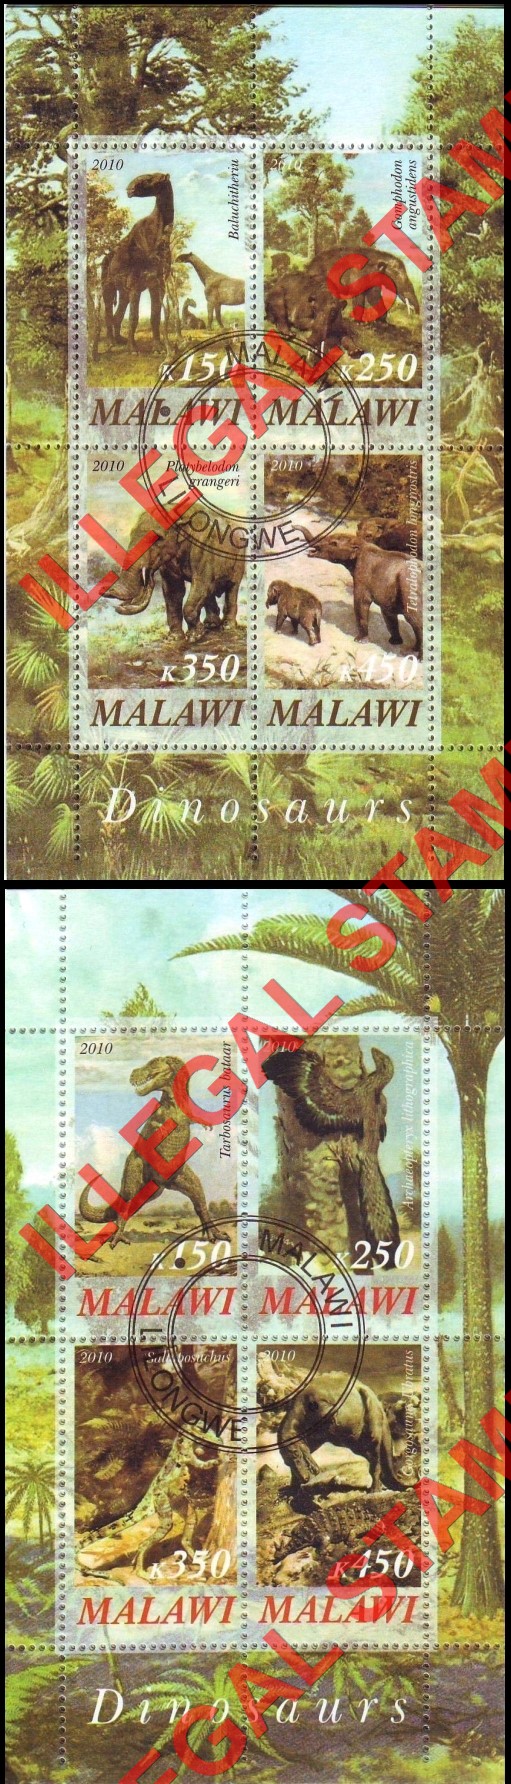 Malawi 2010 Dinosaurs Illegal Stamp Souvenir Sheets of 4 (Part 4)